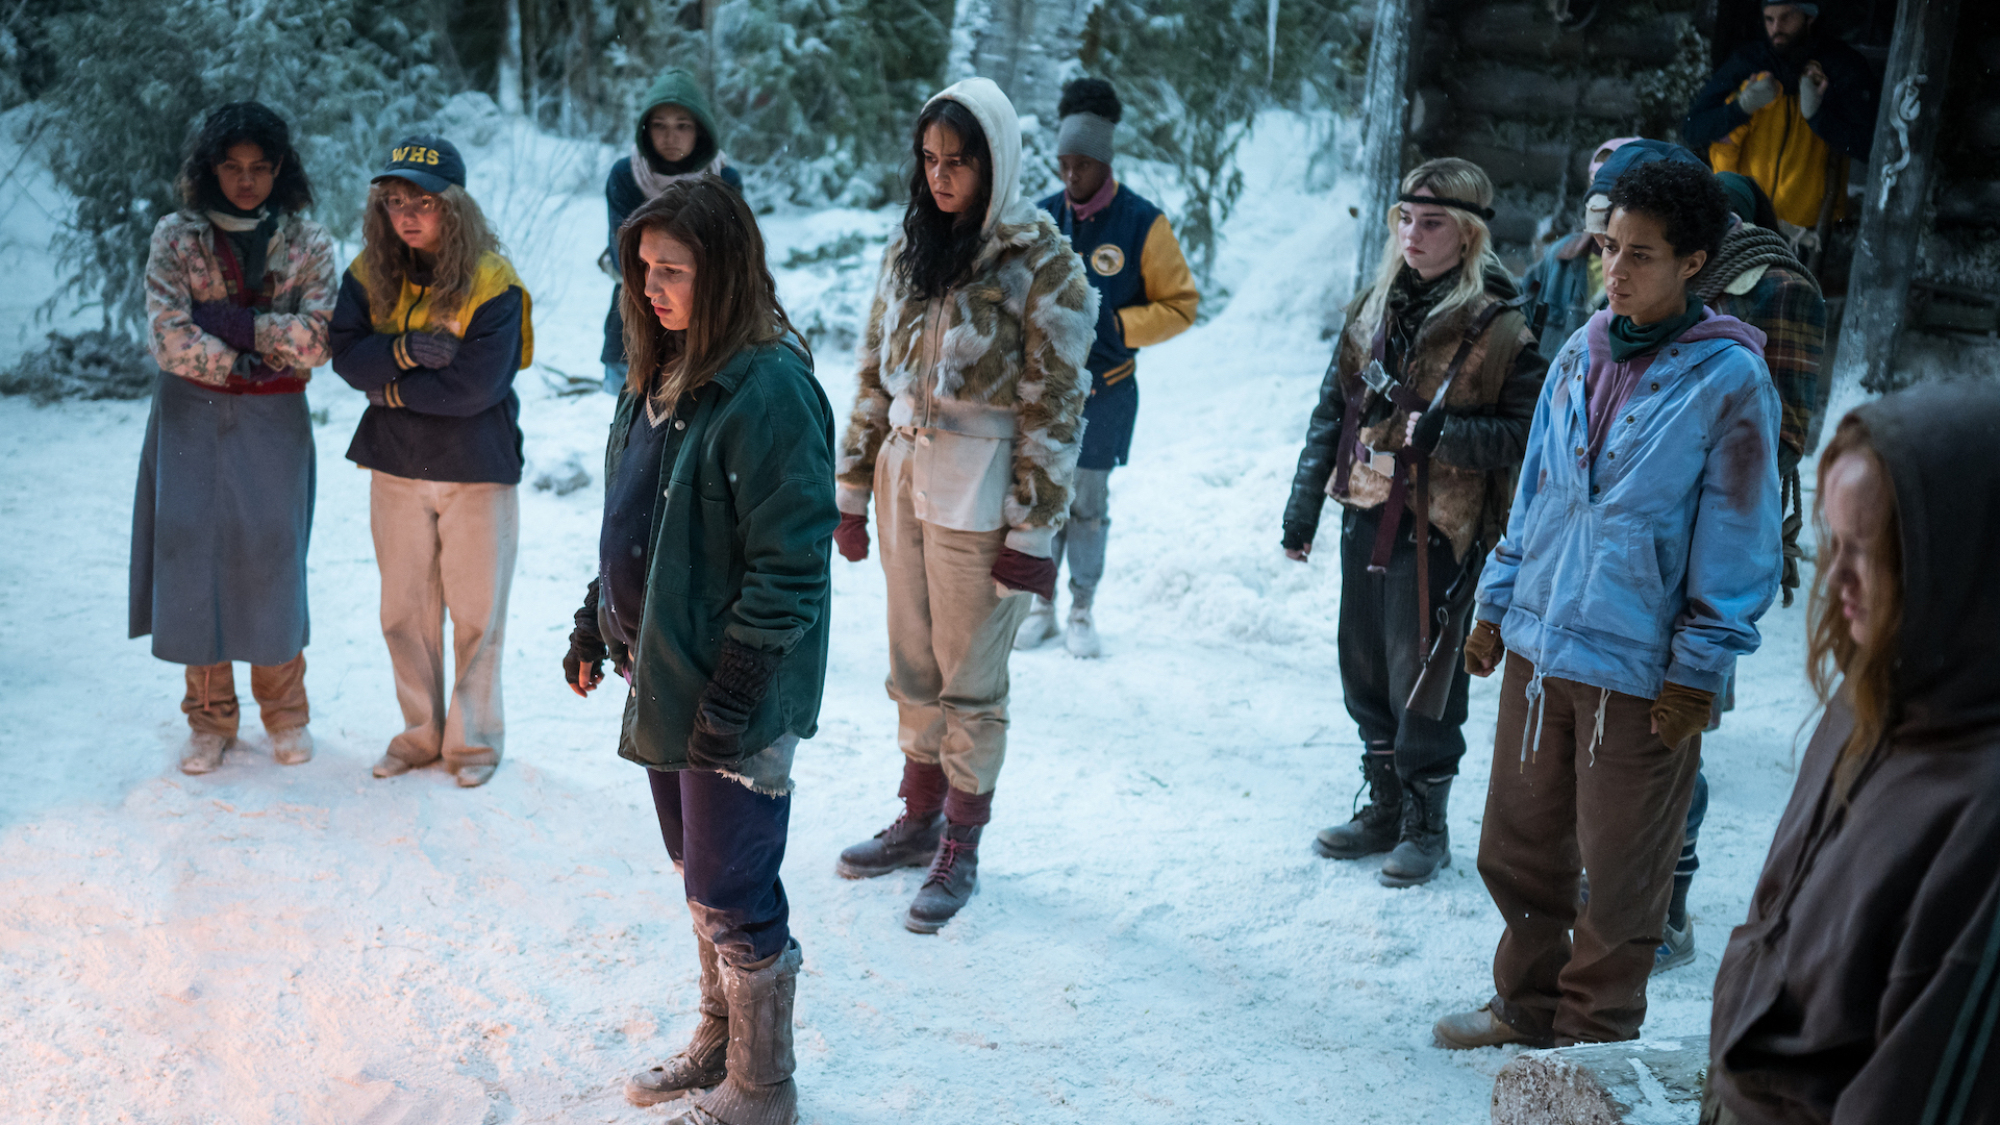 A group of teen girls and two boys stand in the snow in vigil, as if at a funeral.